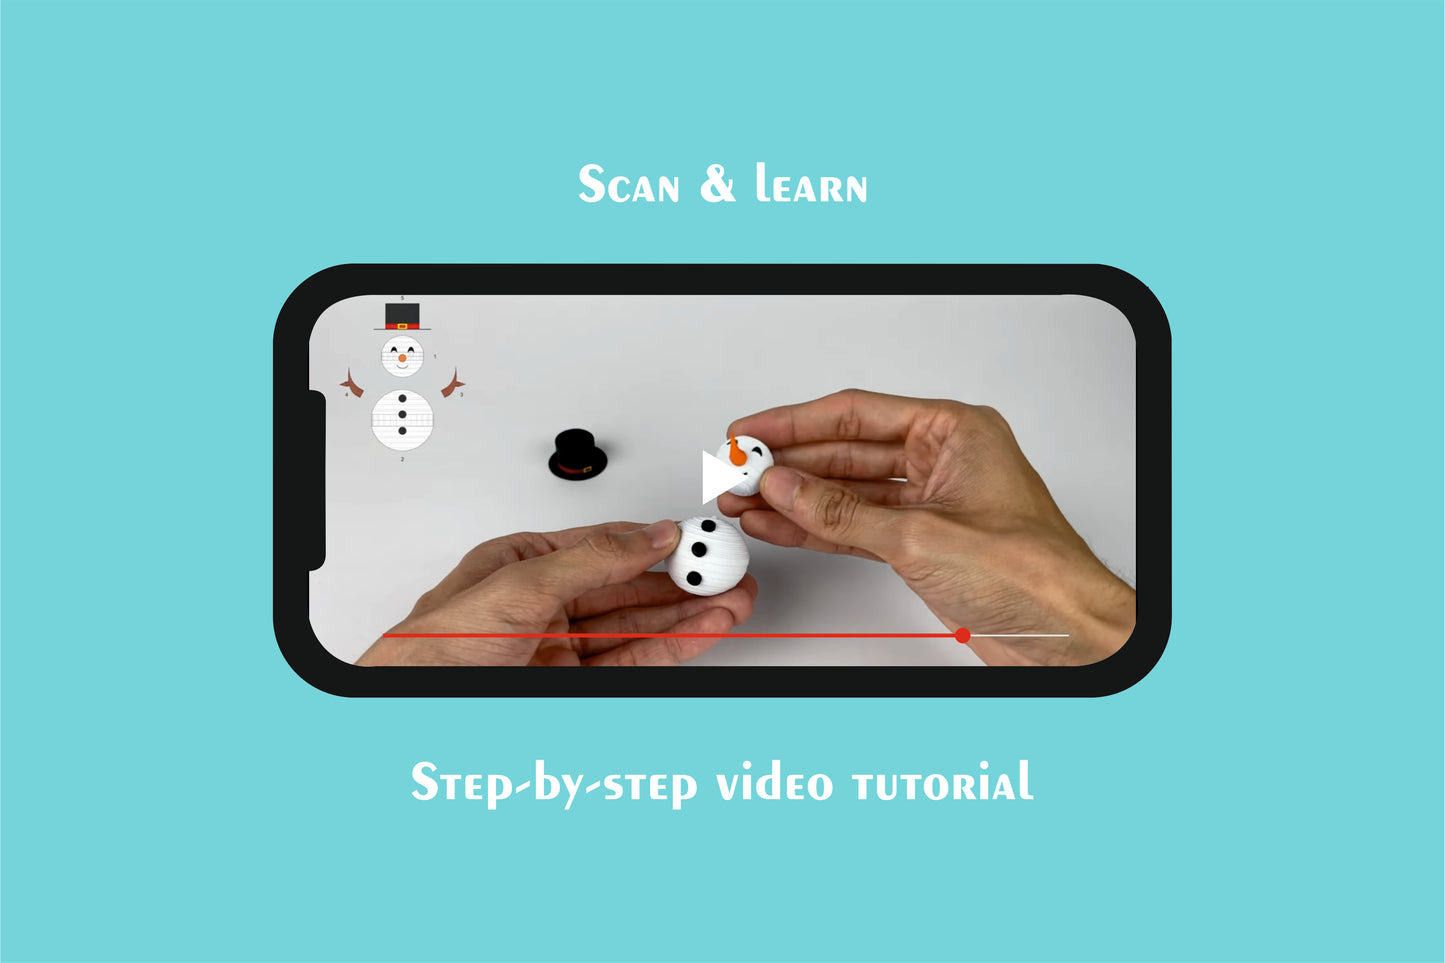 Frosty The Snowman 3D Quilling DIY Kit